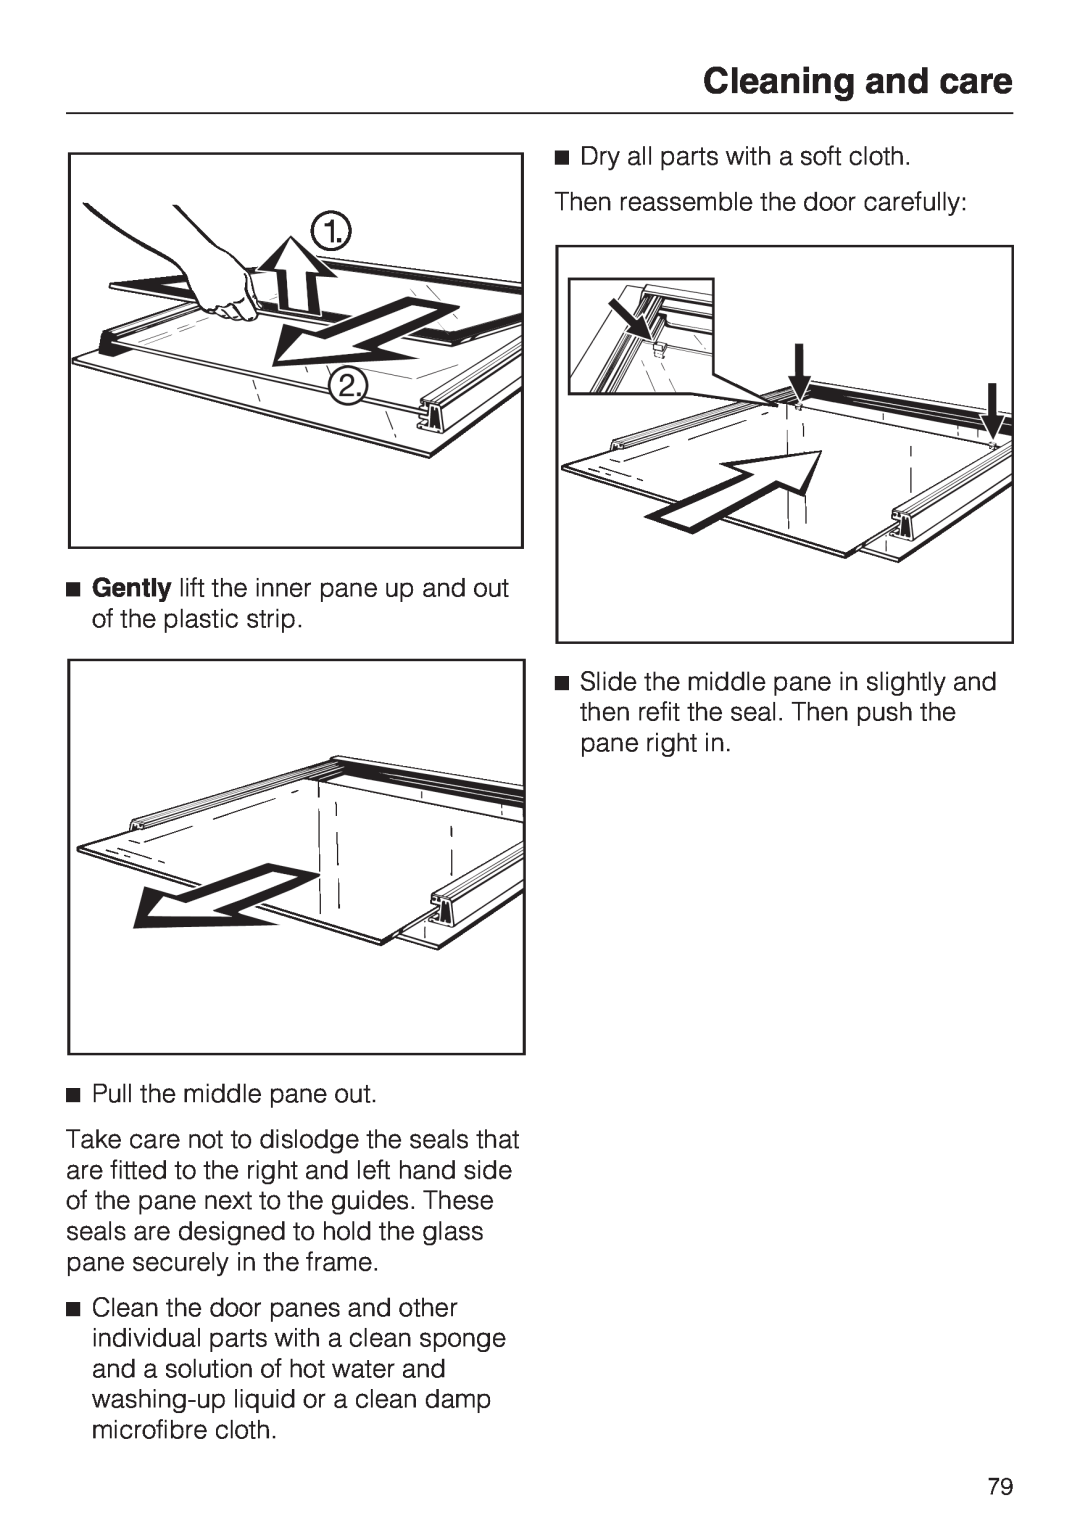 Miele 10 102 470 installation instructions Cleaning and care, Pull the middle pane out 